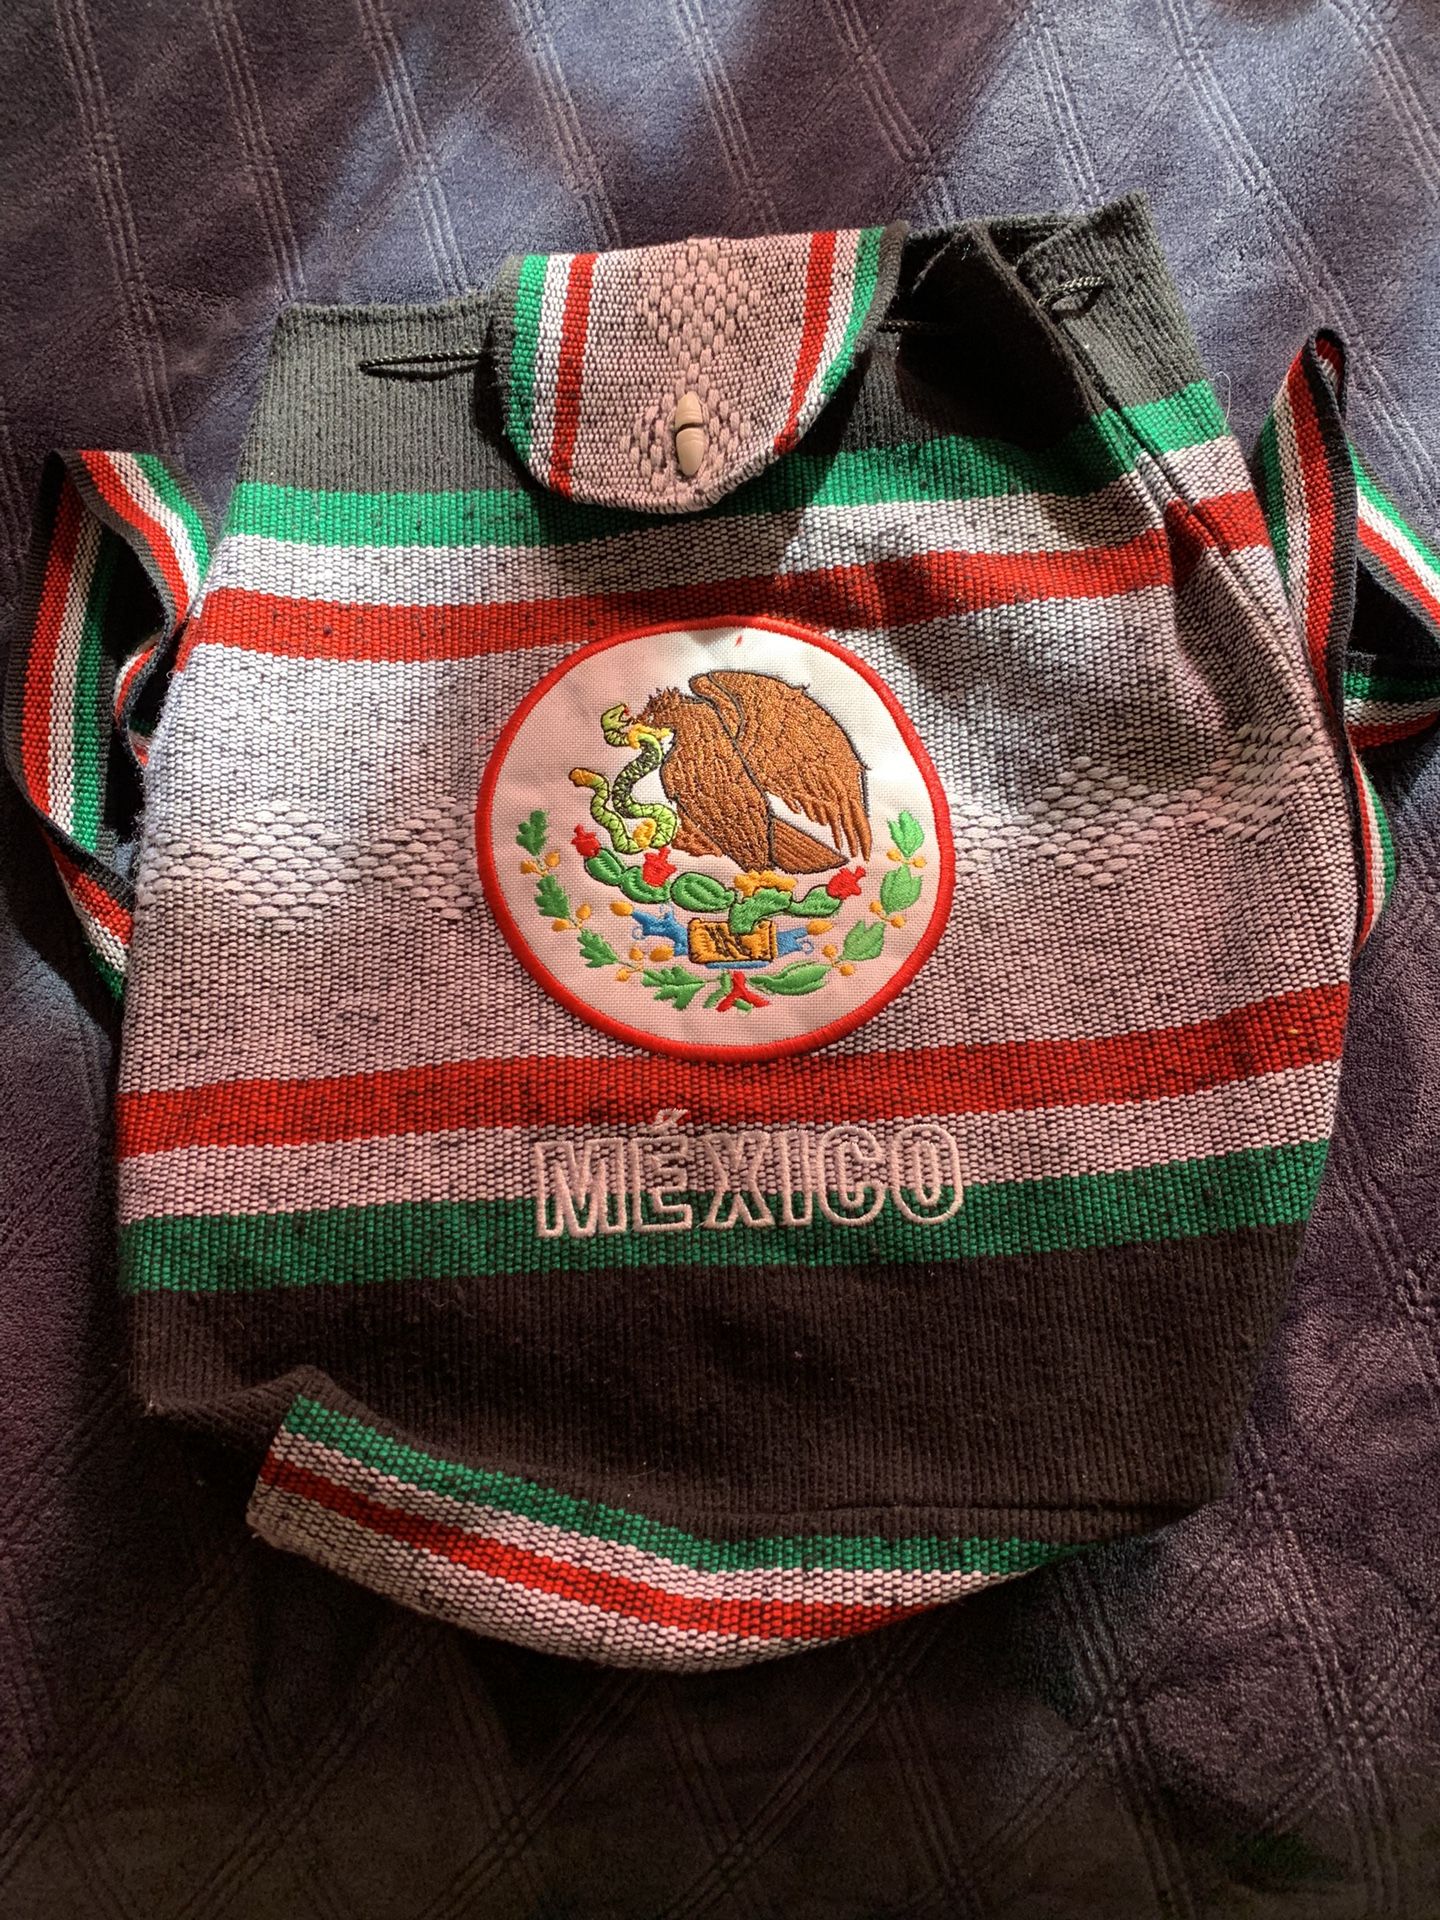 Hand Craft Mexico Backpack